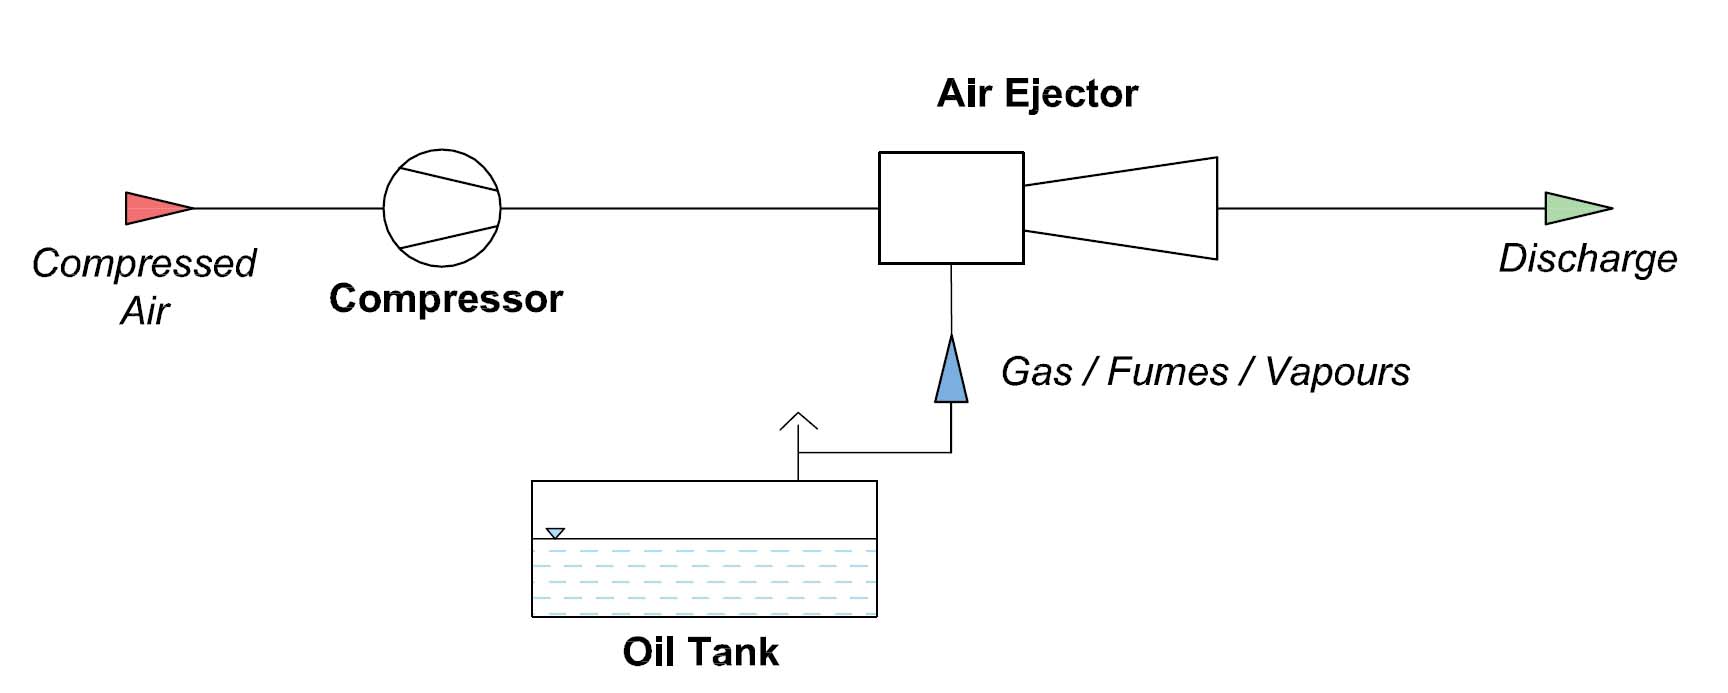 Air Ejectors for Gas, Vapour & Fumes Venting